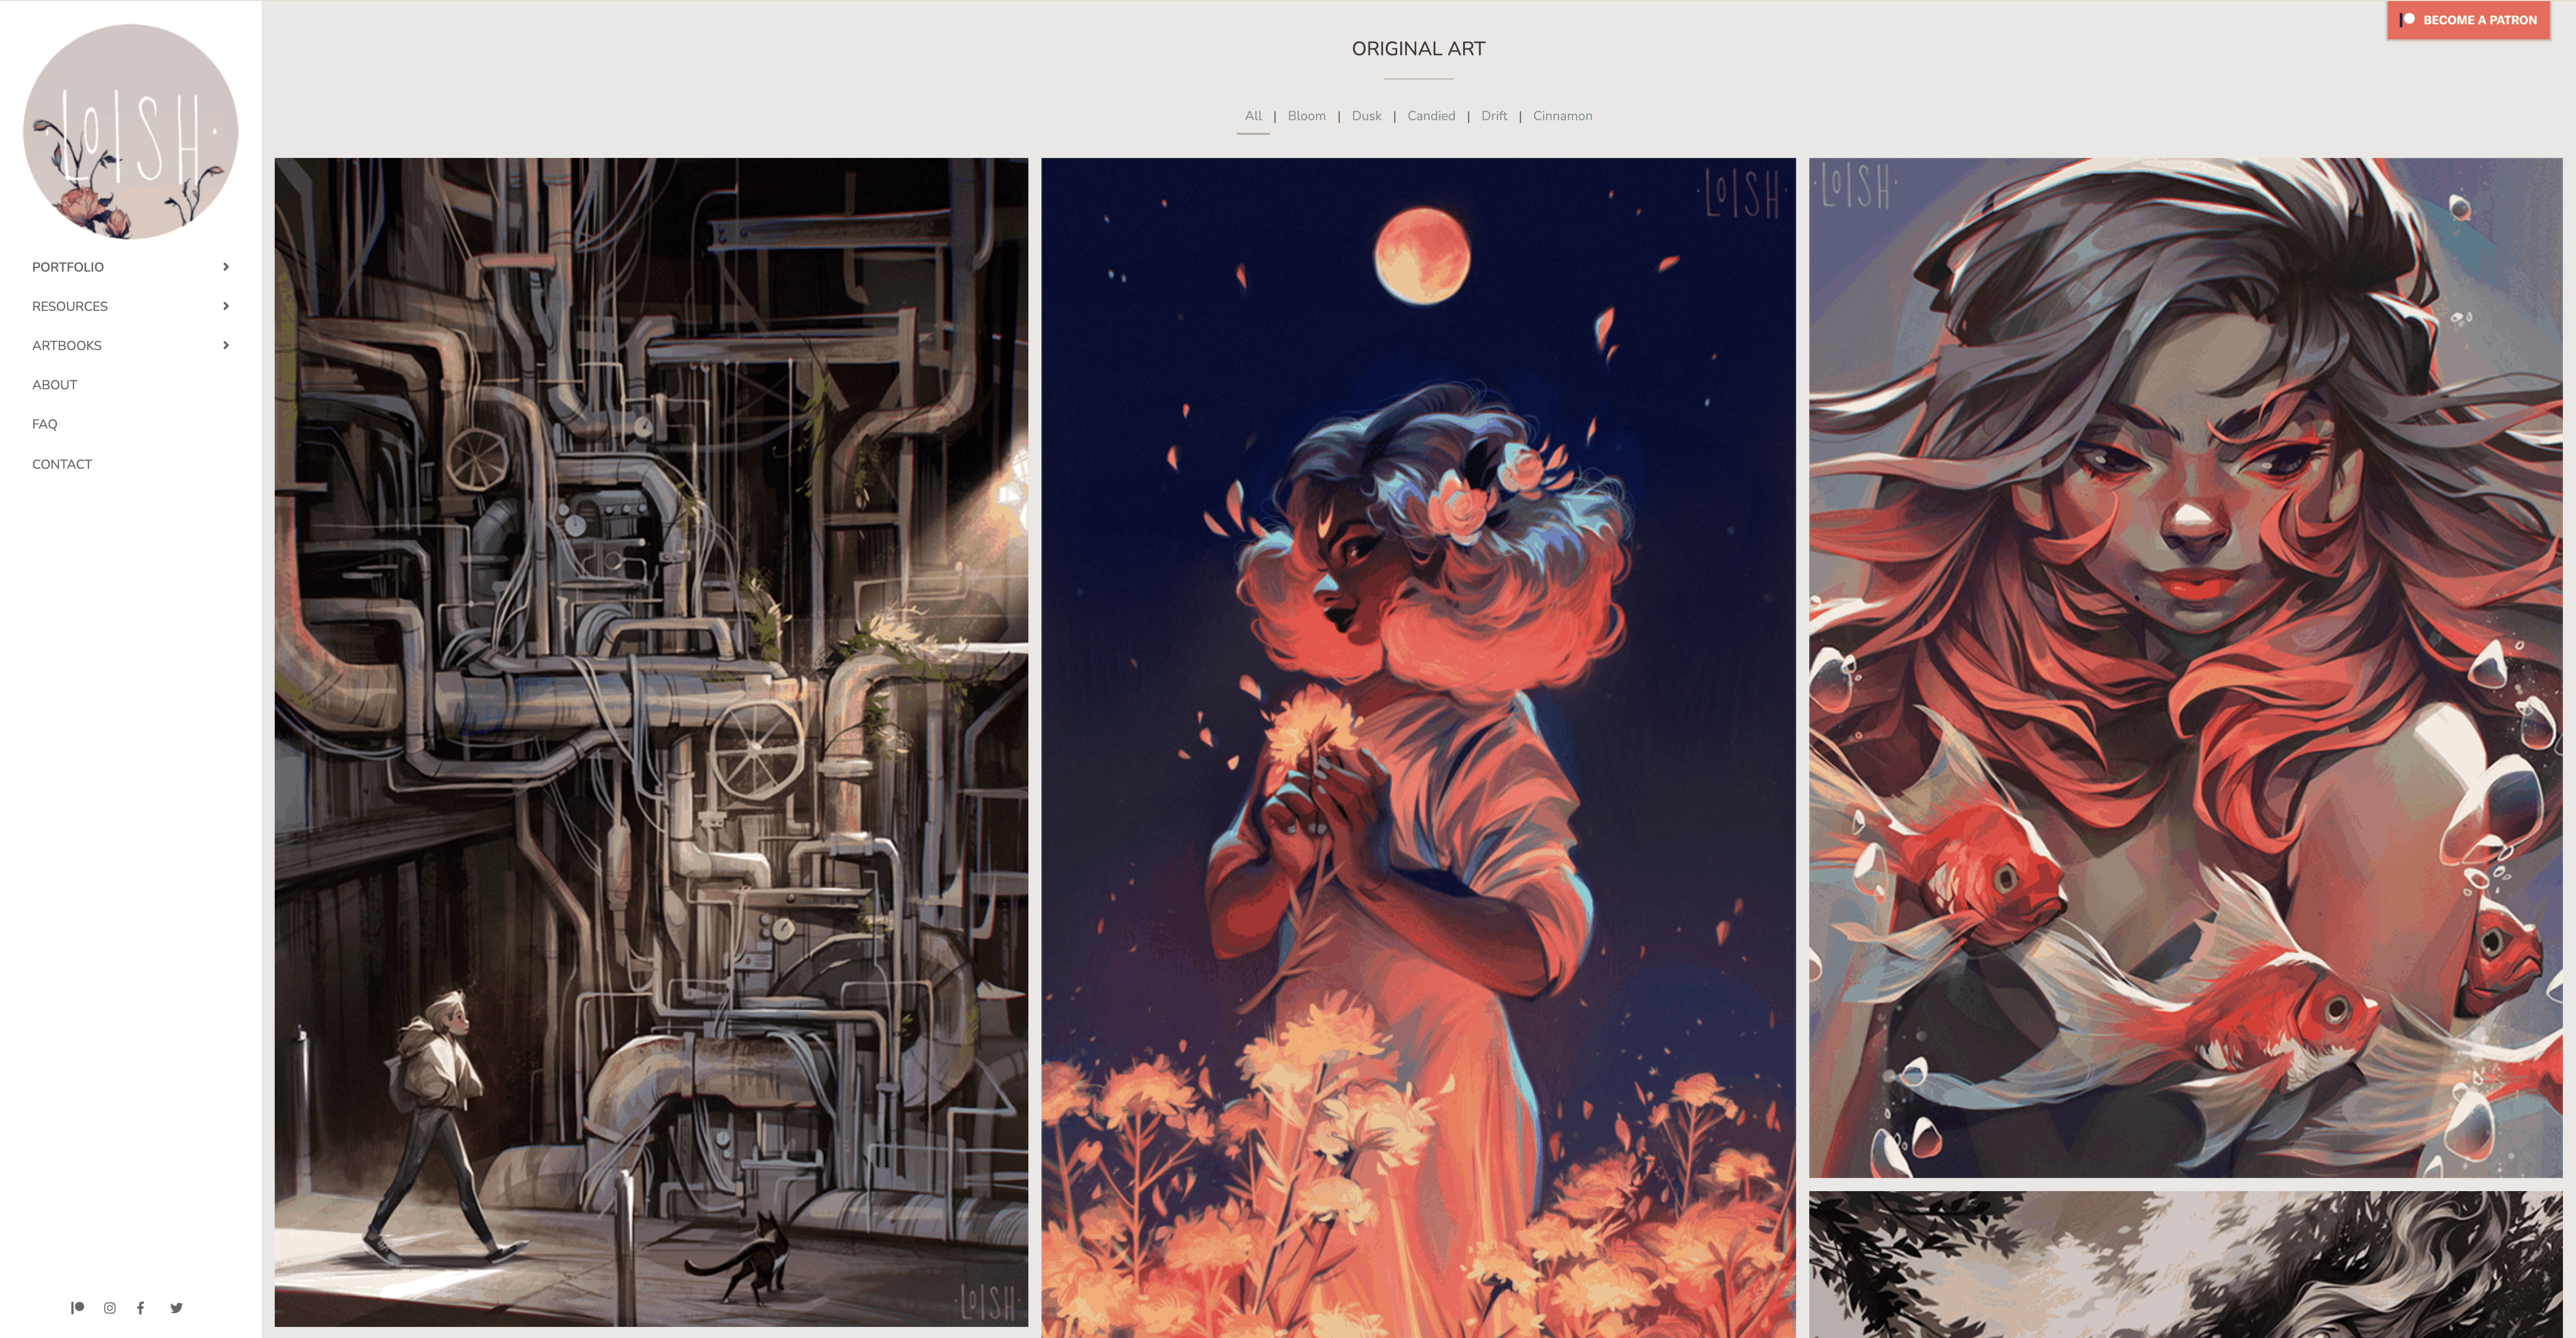 The Art of Loish is one of the most beautiful art blogs I've ever seen. This is how you start an art blog and then grow it to become a full-time business. 